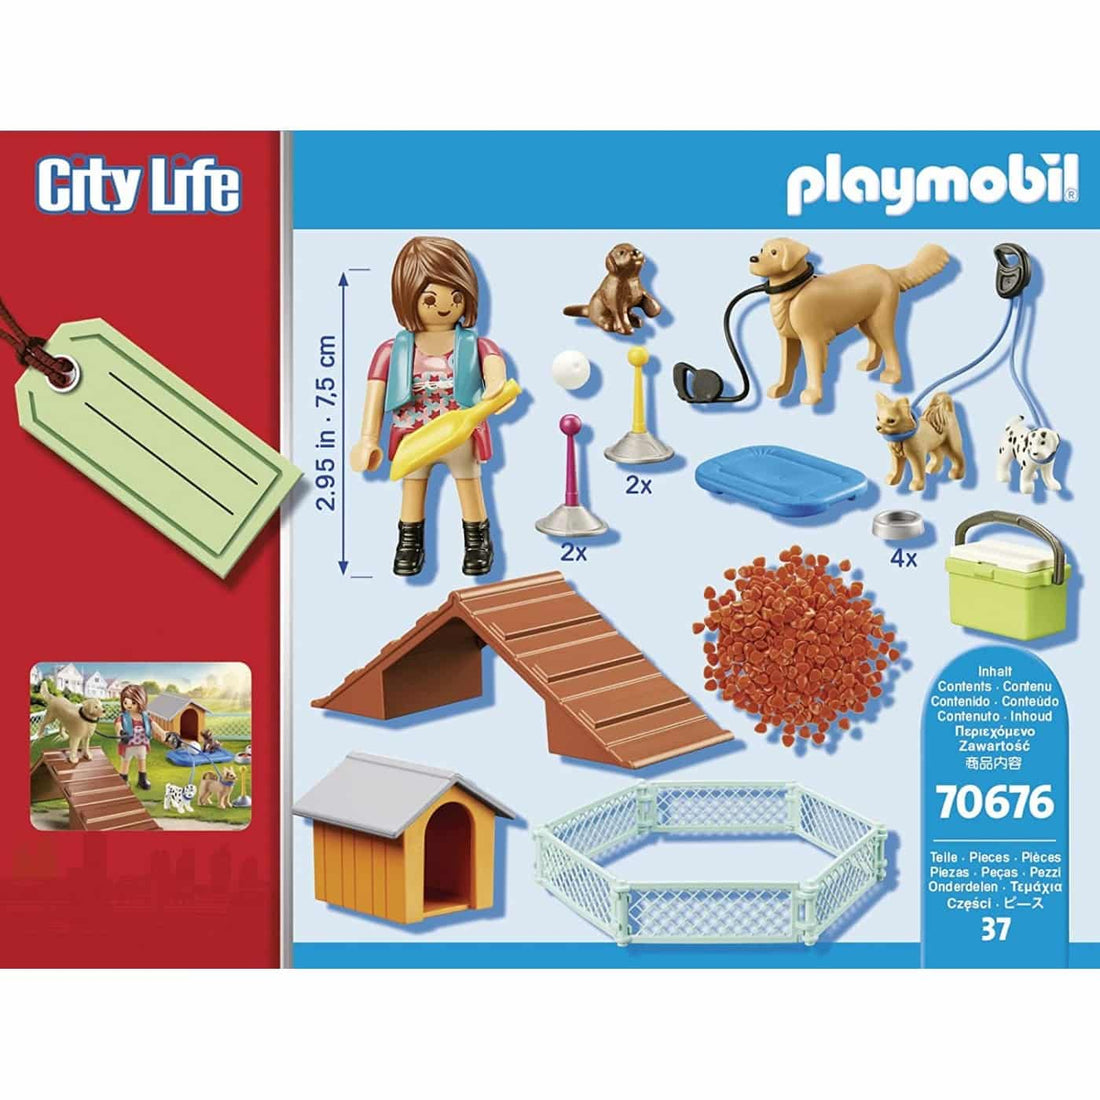 70676 Playmobil City Life Gift Set Εκπαιδευτρια Σκυλων